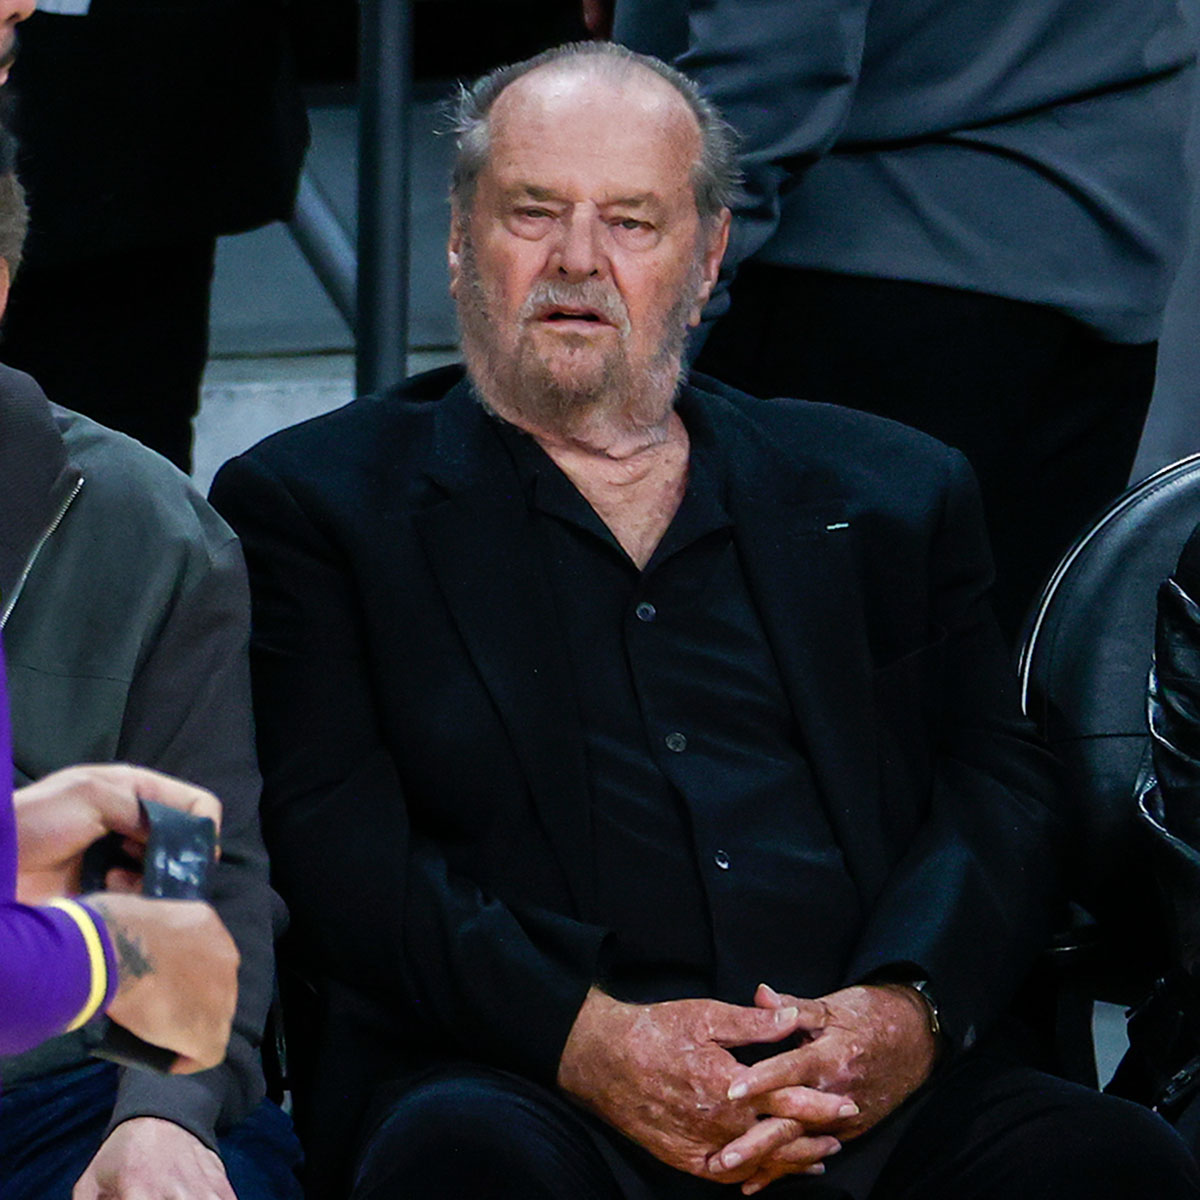 FEATURE Jack NicholsonVMakes Rare Public Appearance at Lakers Game 5